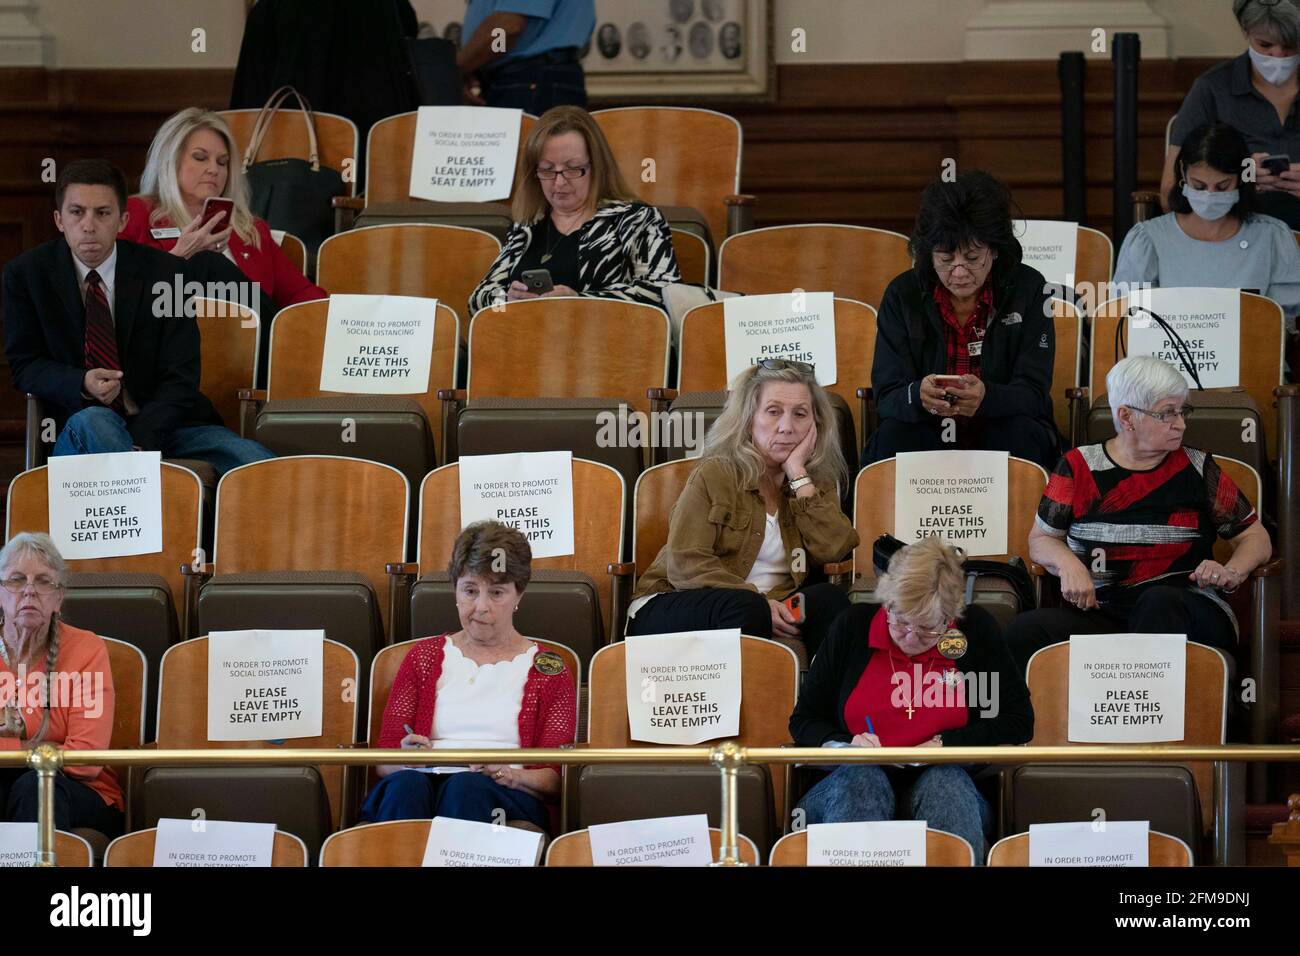 Austin, TX, USA. 6th May, 2021. The Texas House debating SB 7 late into the night a controversial omnibus elections bill that would make changes to the way Texas elections are held. Citizens watching in the House gallery. Credit: Bob Daemmrich/ZUMA Wire/Alamy Live News Stock Photo